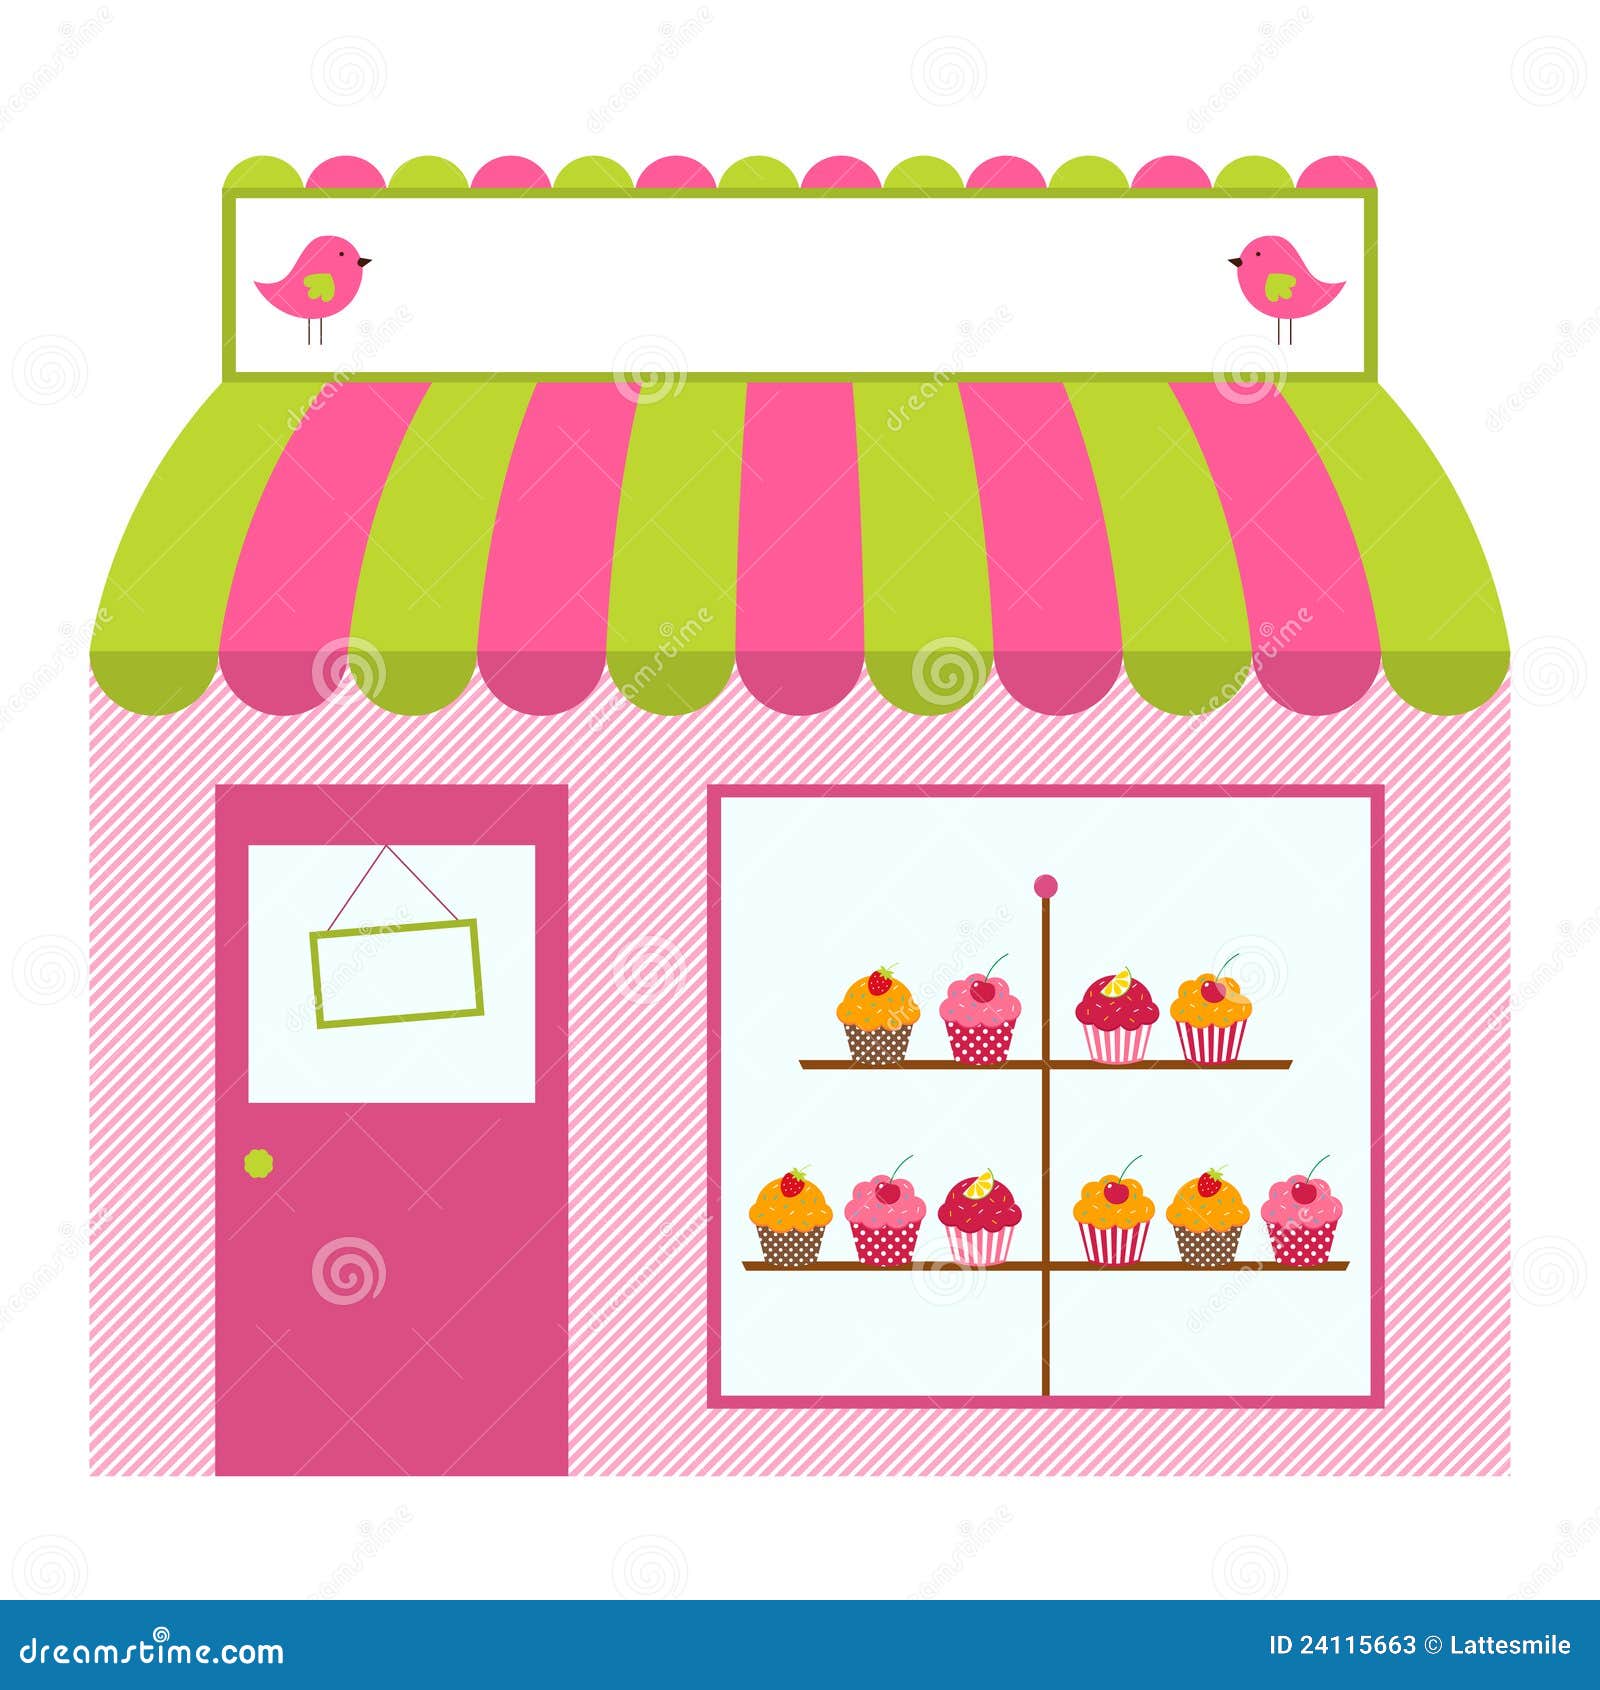  Shop  or cafe design  stock vector Image of store vector 